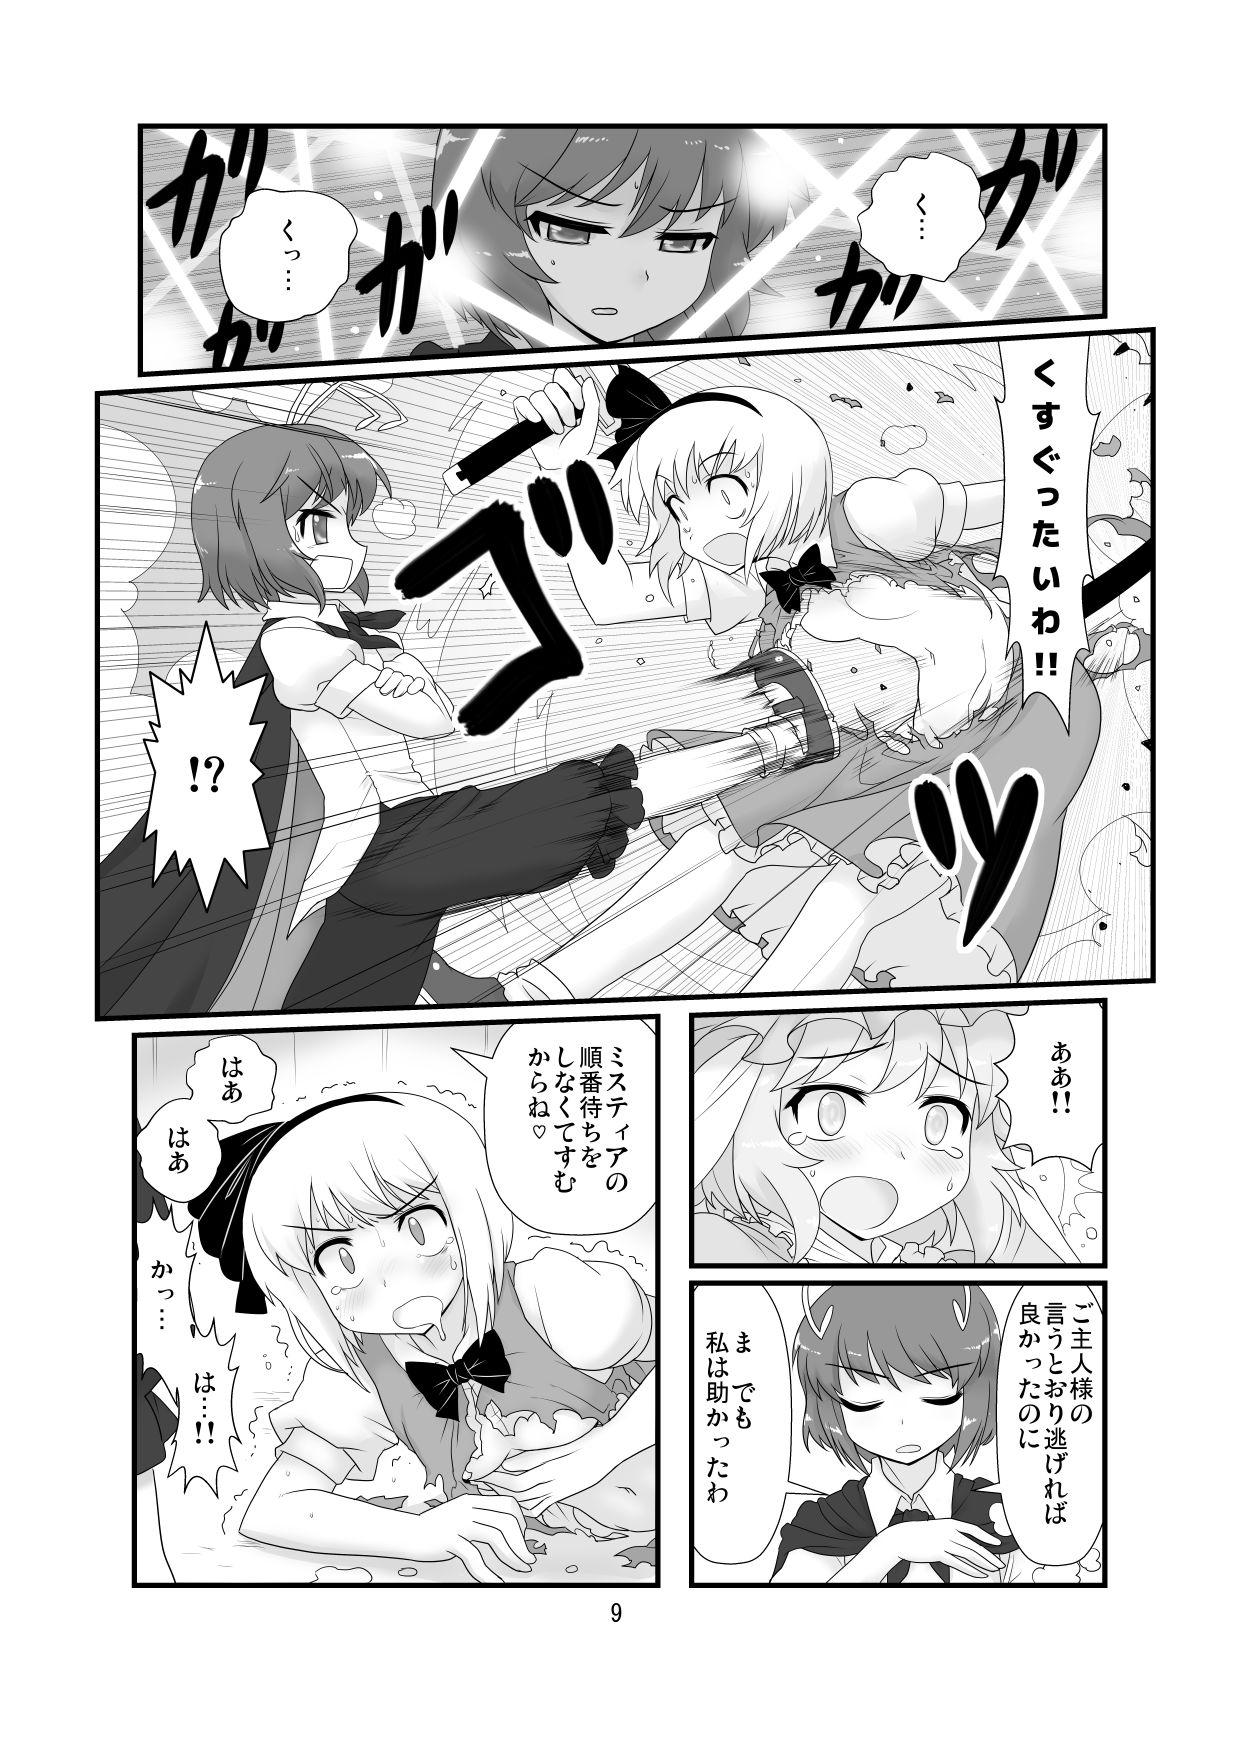 Trans Super Wriggle Cooking - Touhou project High Definition - Page 10